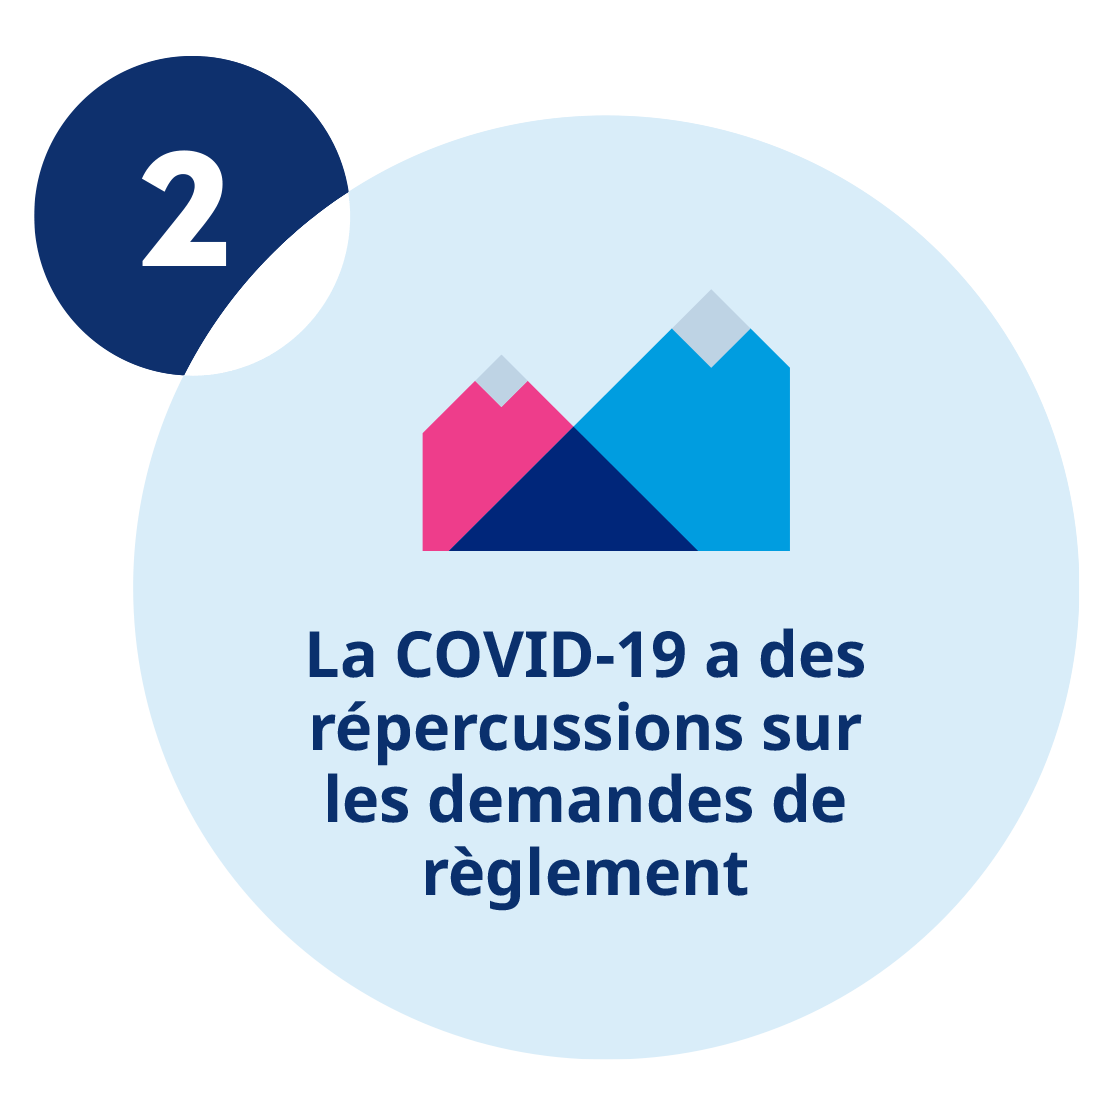 2. COVID-19 is impacting claims experience